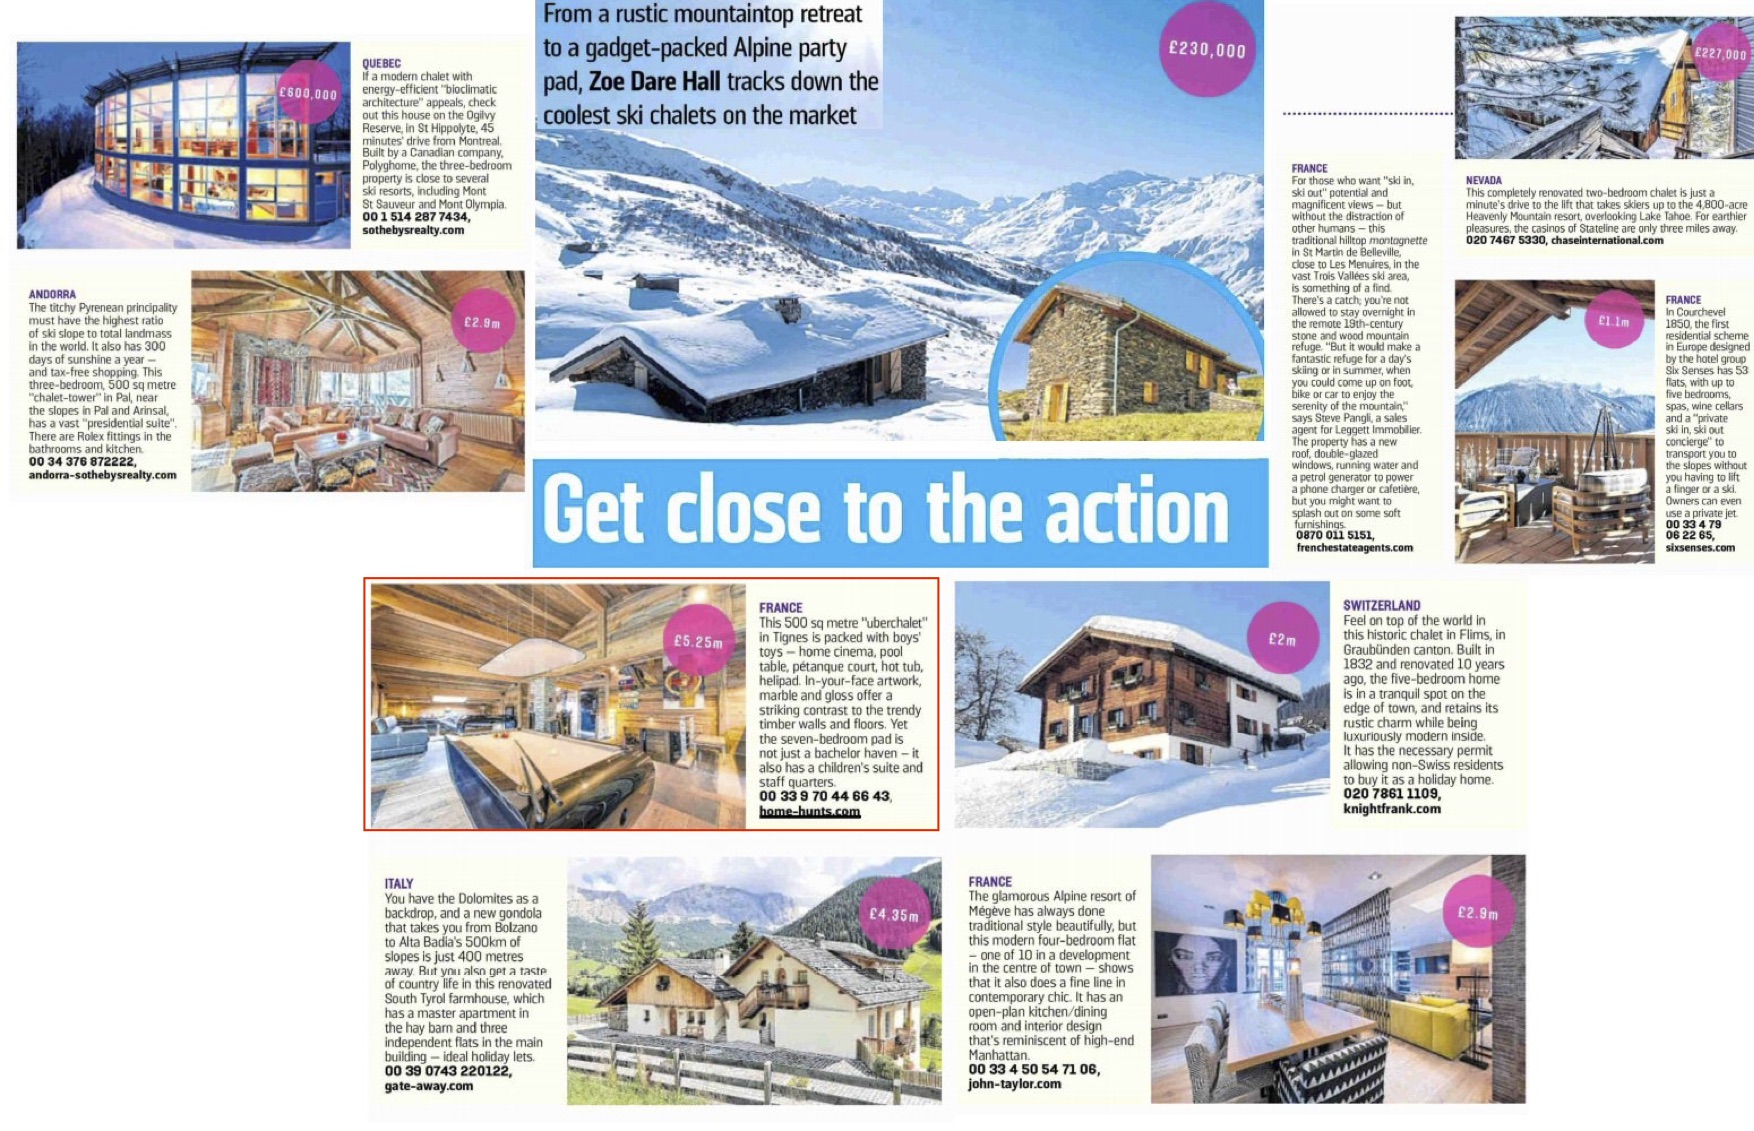 The Sunday Times – Finding the ultimate high-altitude party pad – Ski chalets for sale around the world